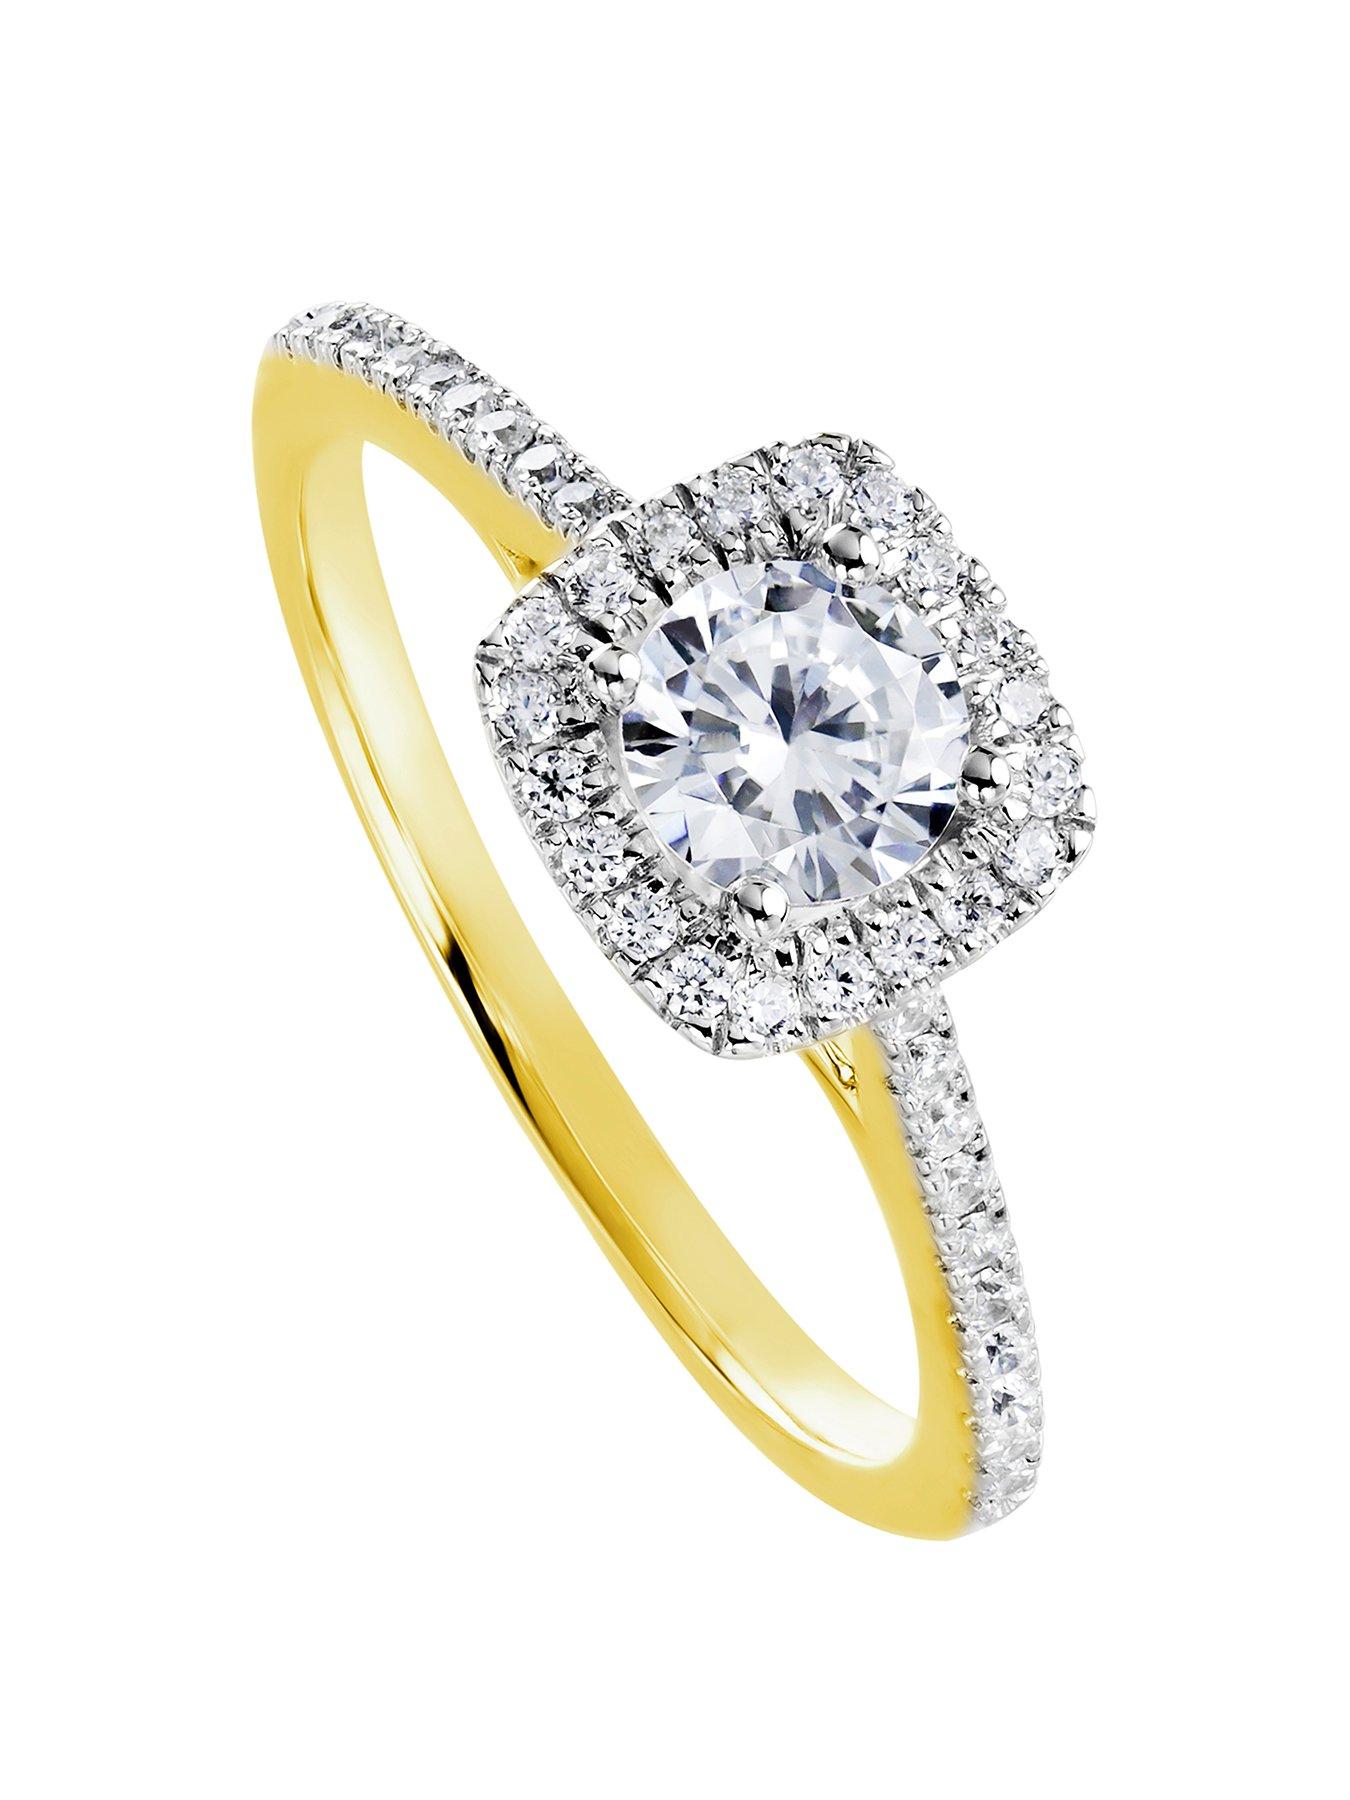 Details about   1.20 Ct Round Cut Diamond Wedding Band 14K Yellow Gold Over 925 Silver 